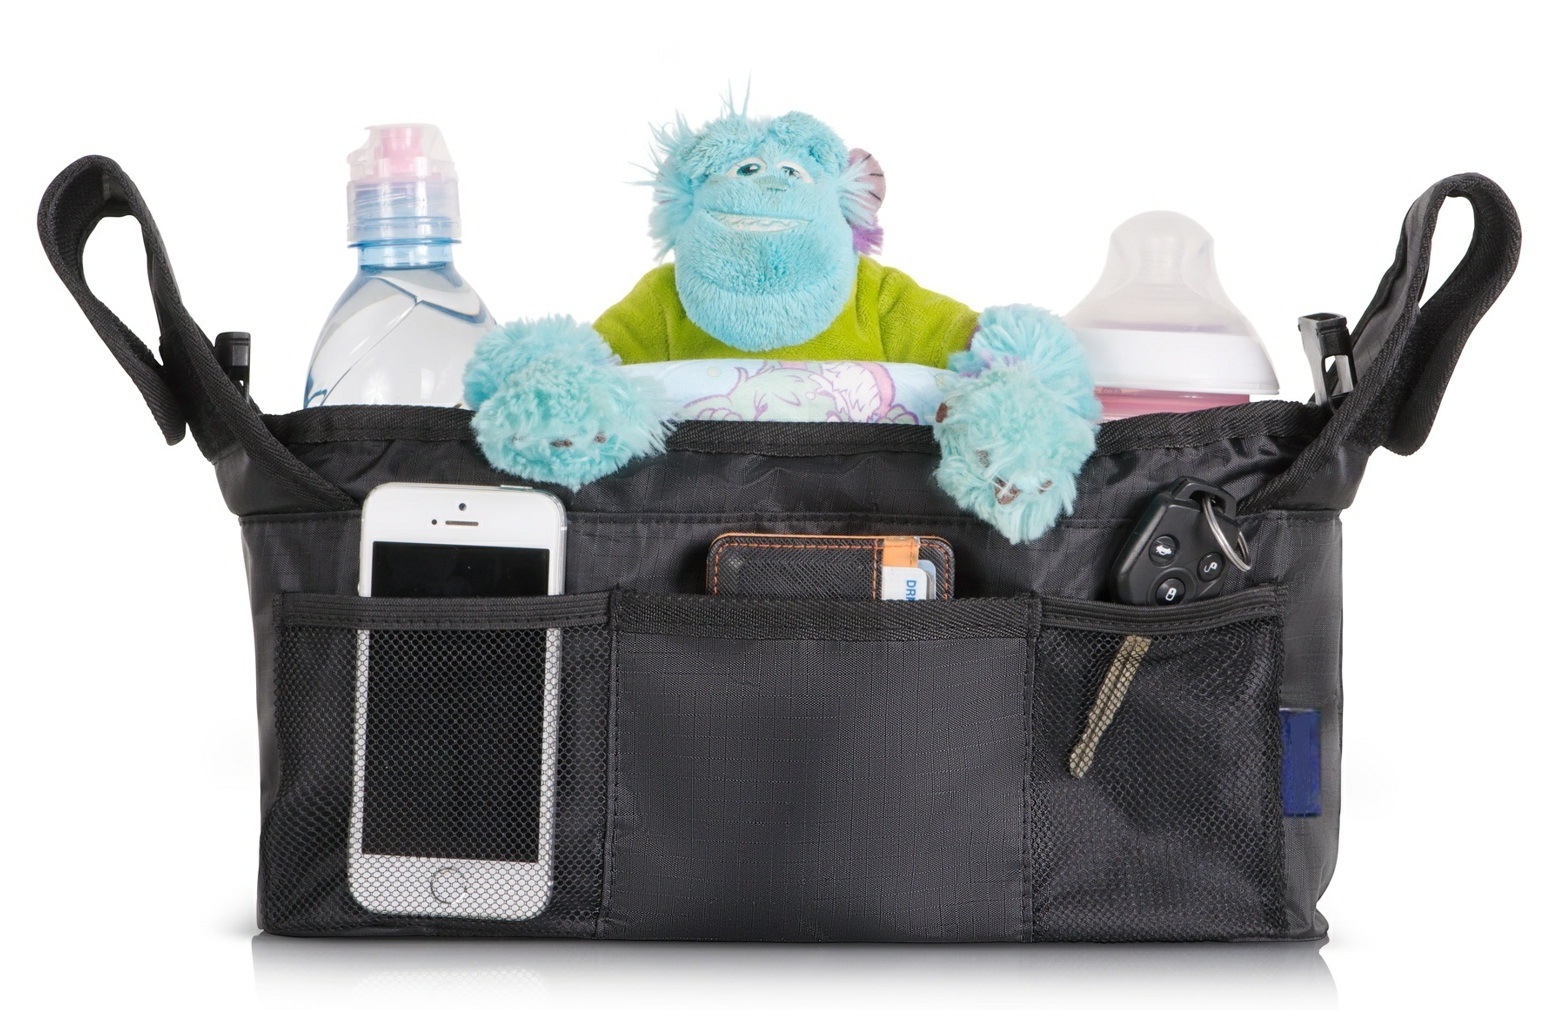 /proimages/2f0j00DQLUdlszYioI/baby-accessories-organizer-stroller-bag-with-2-insulated-cup-holders.jpg